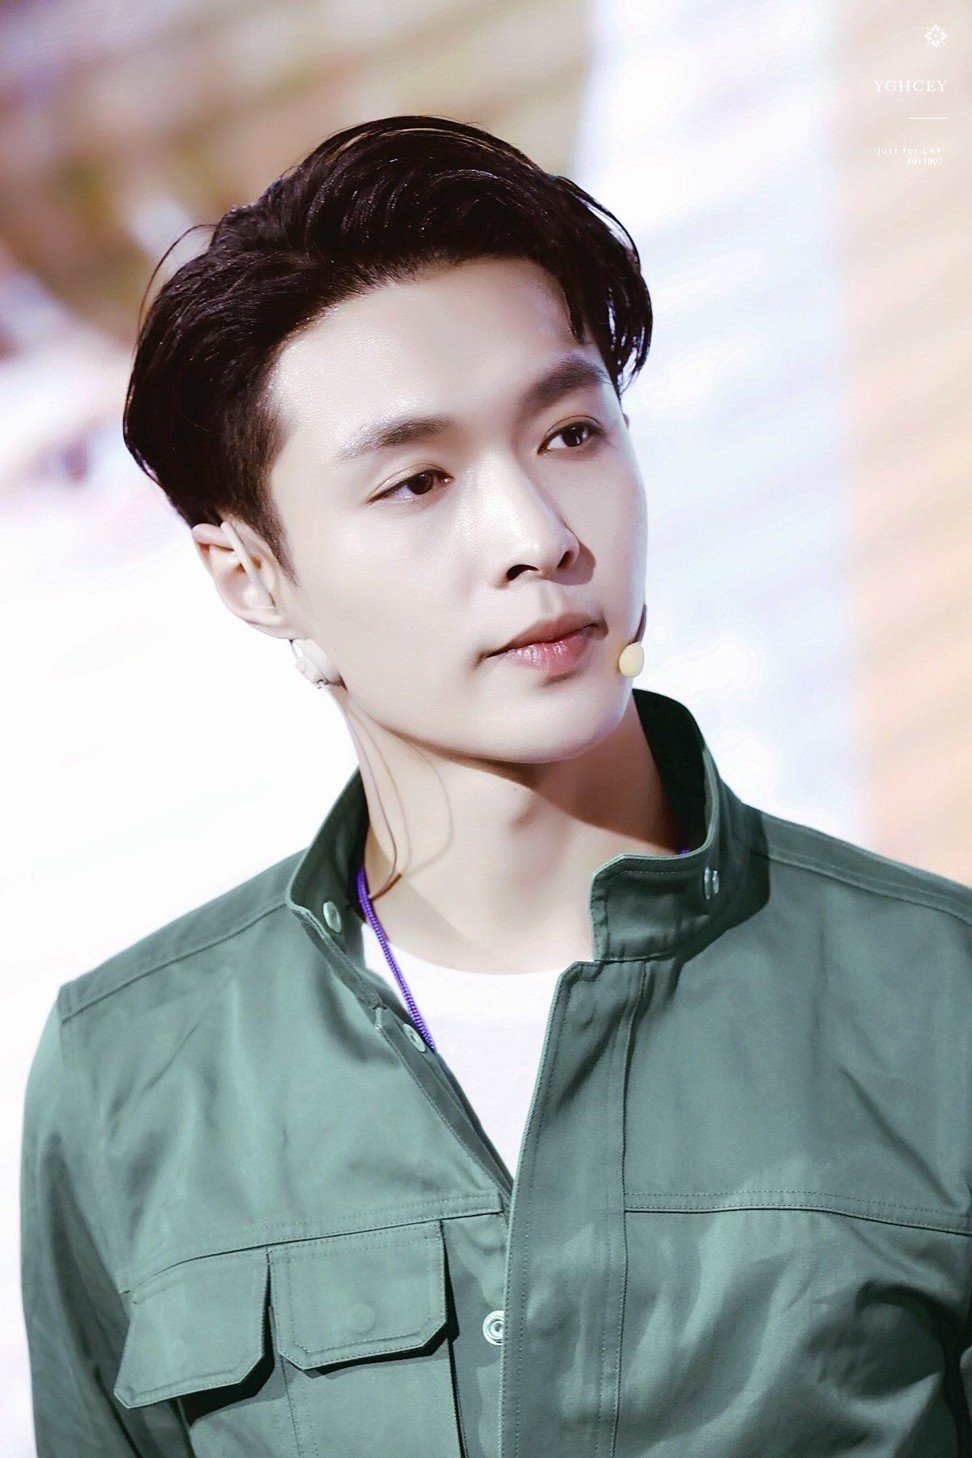 Lay performed with K-pop band Shinee before joining Exo.